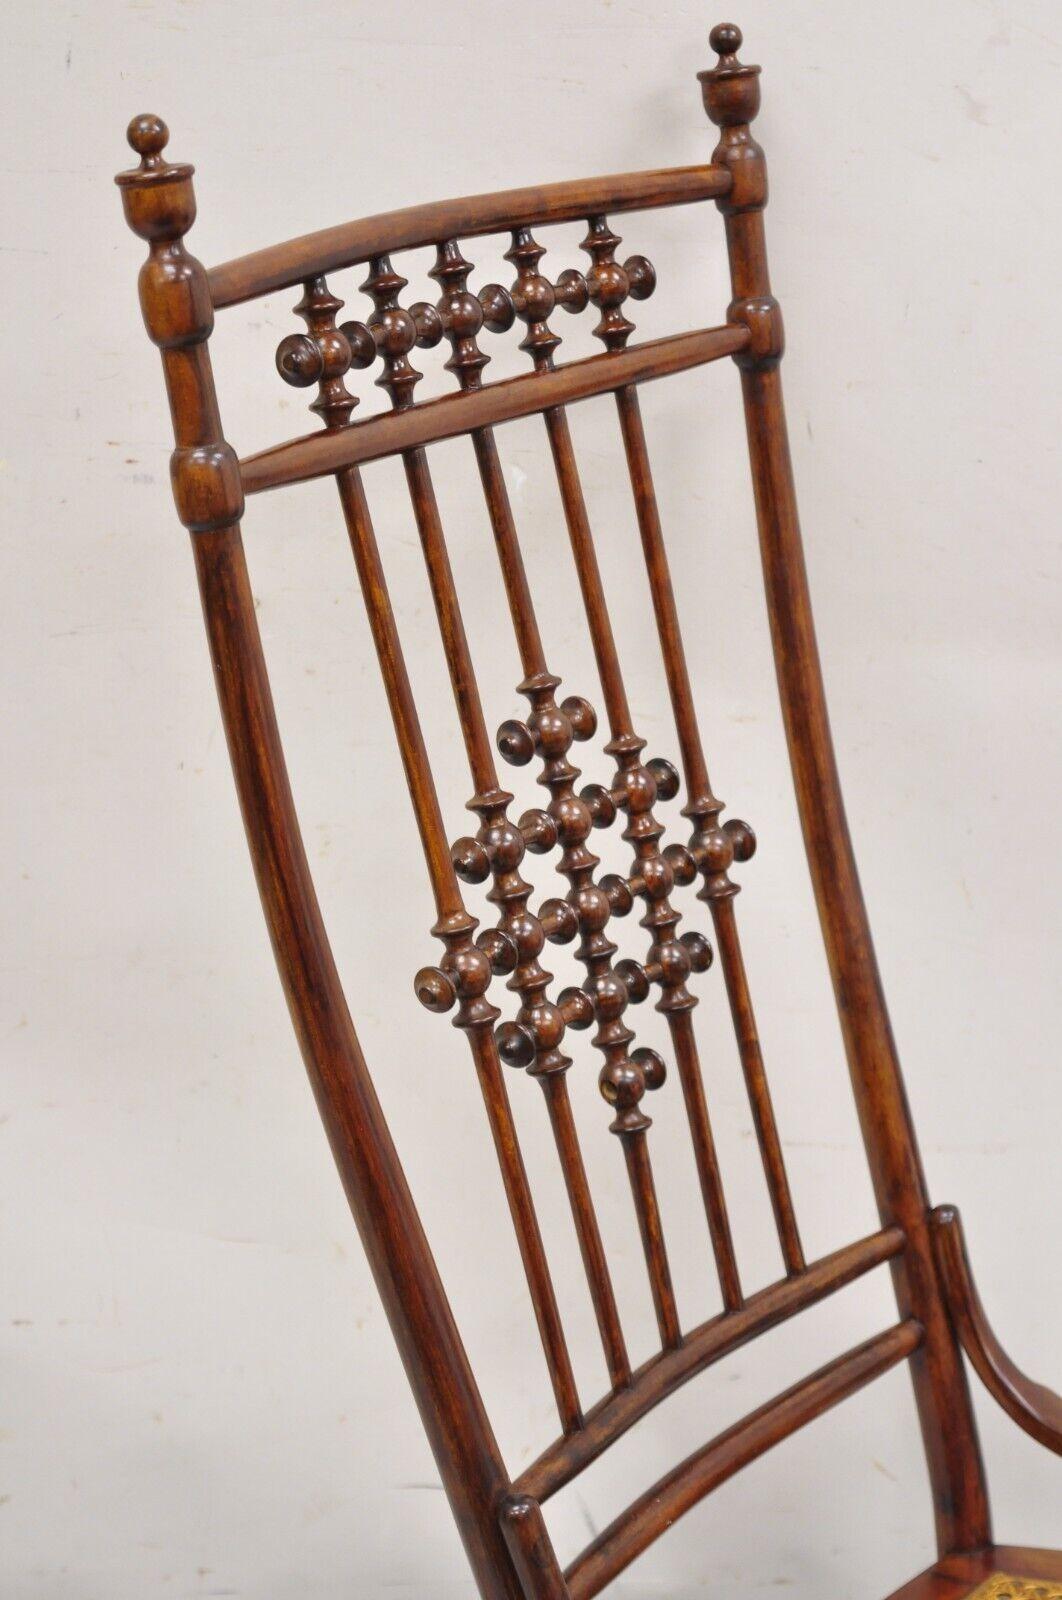 Cane Victorian Aesthetic Movement Chestnut Stick & Ball Spindle Rocker Rocking Chair For Sale